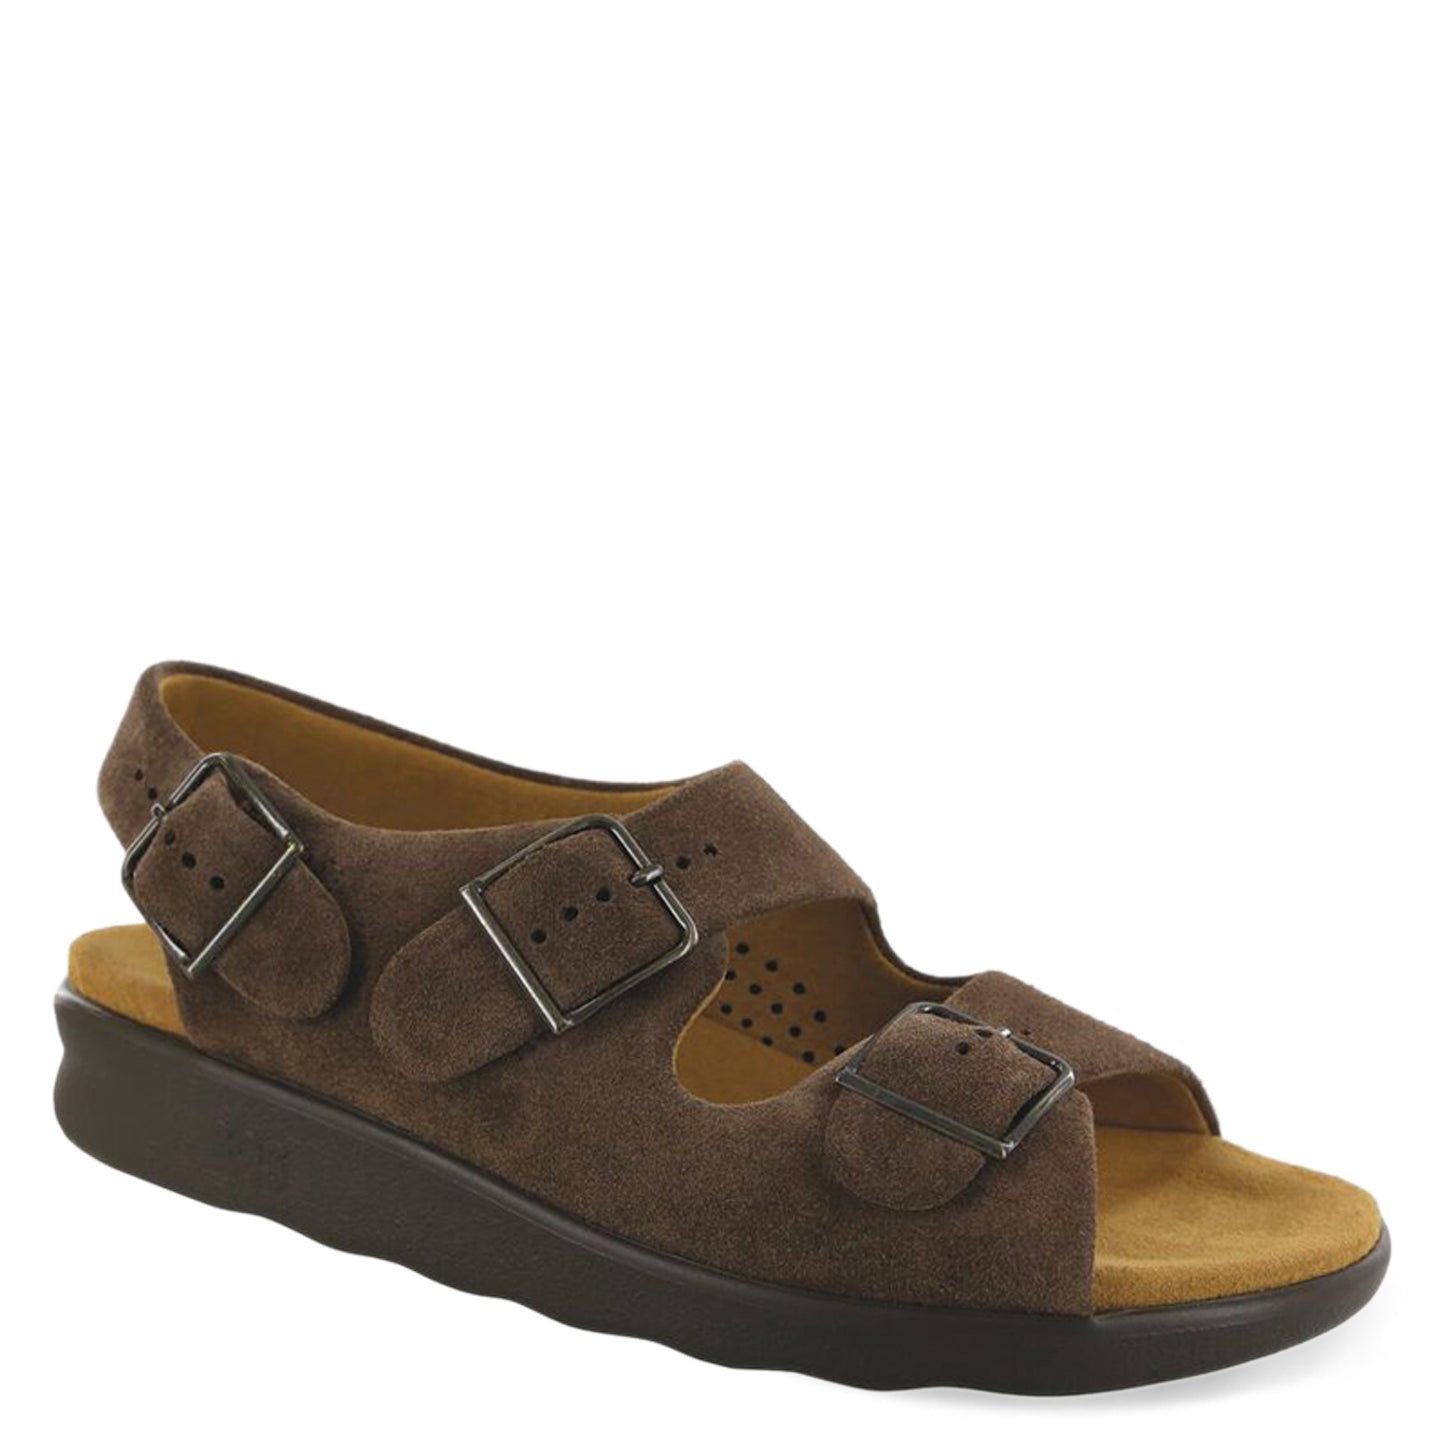 Peltz Shoes  Women's SAS Relaxed Sandal TEDDY BROWN RELAXED TEDDY